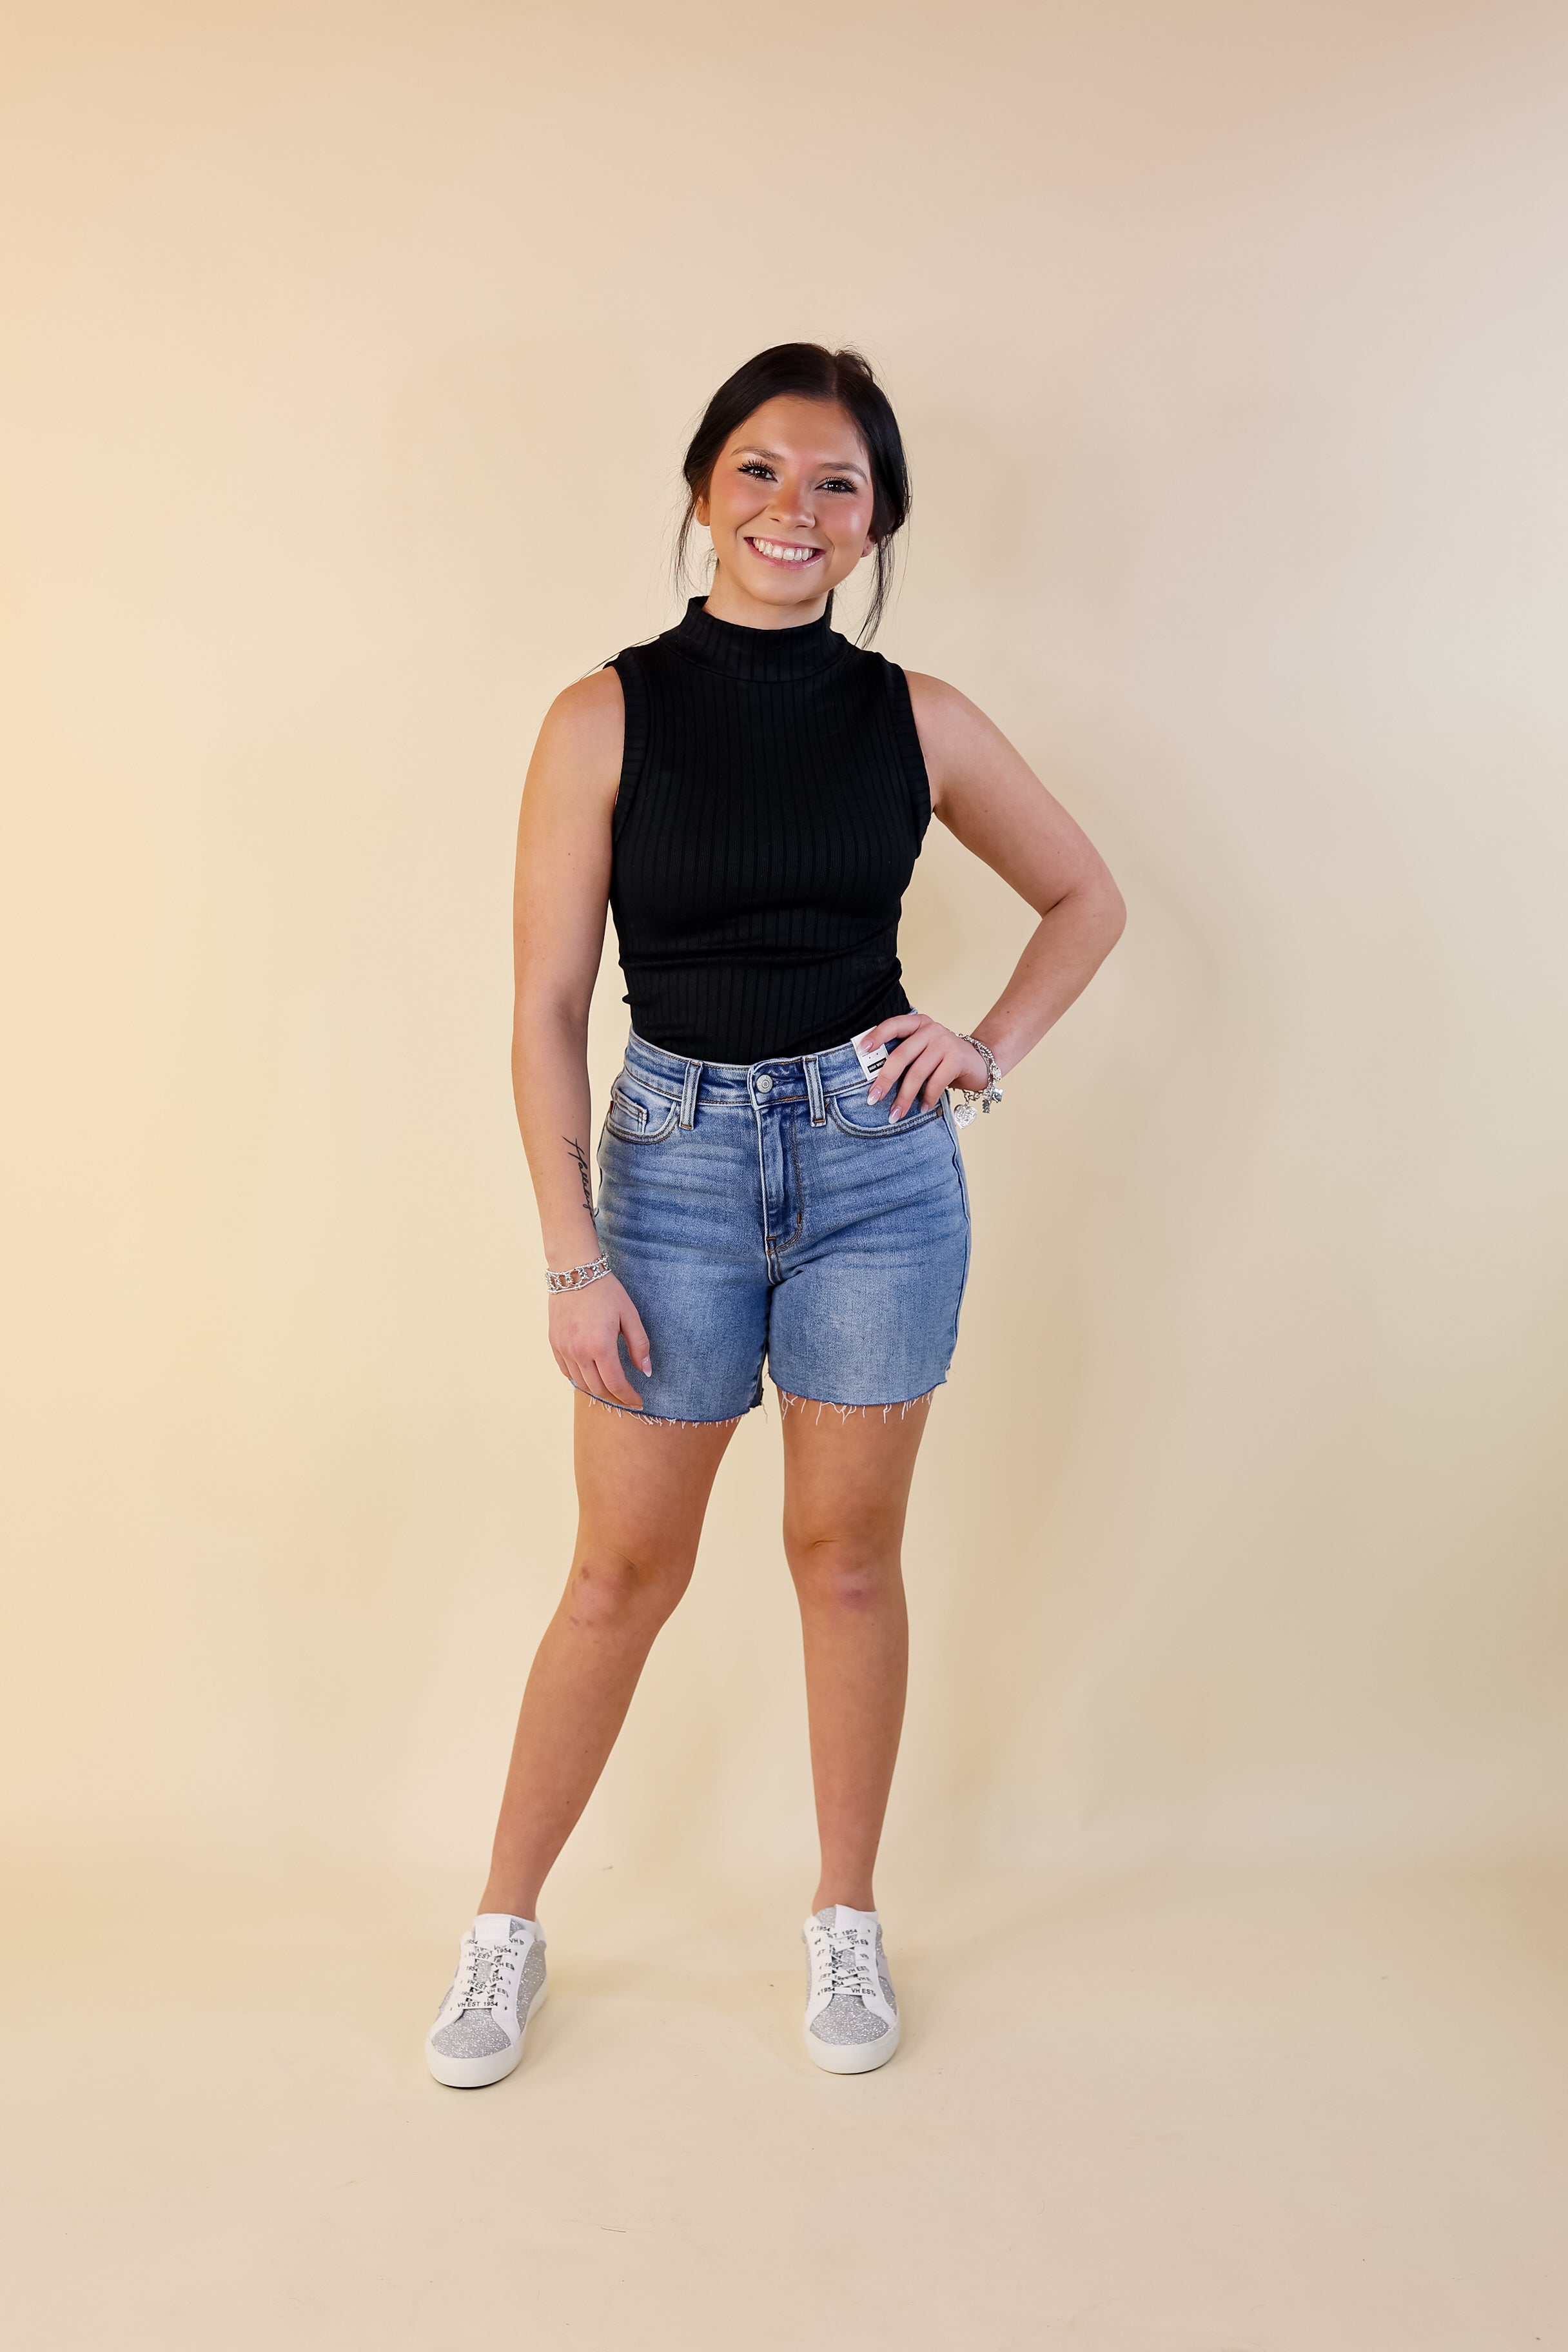 Judy Blue | Street Style Mid Thigh Shorts in Light Wash - Giddy Up Glamour Boutique